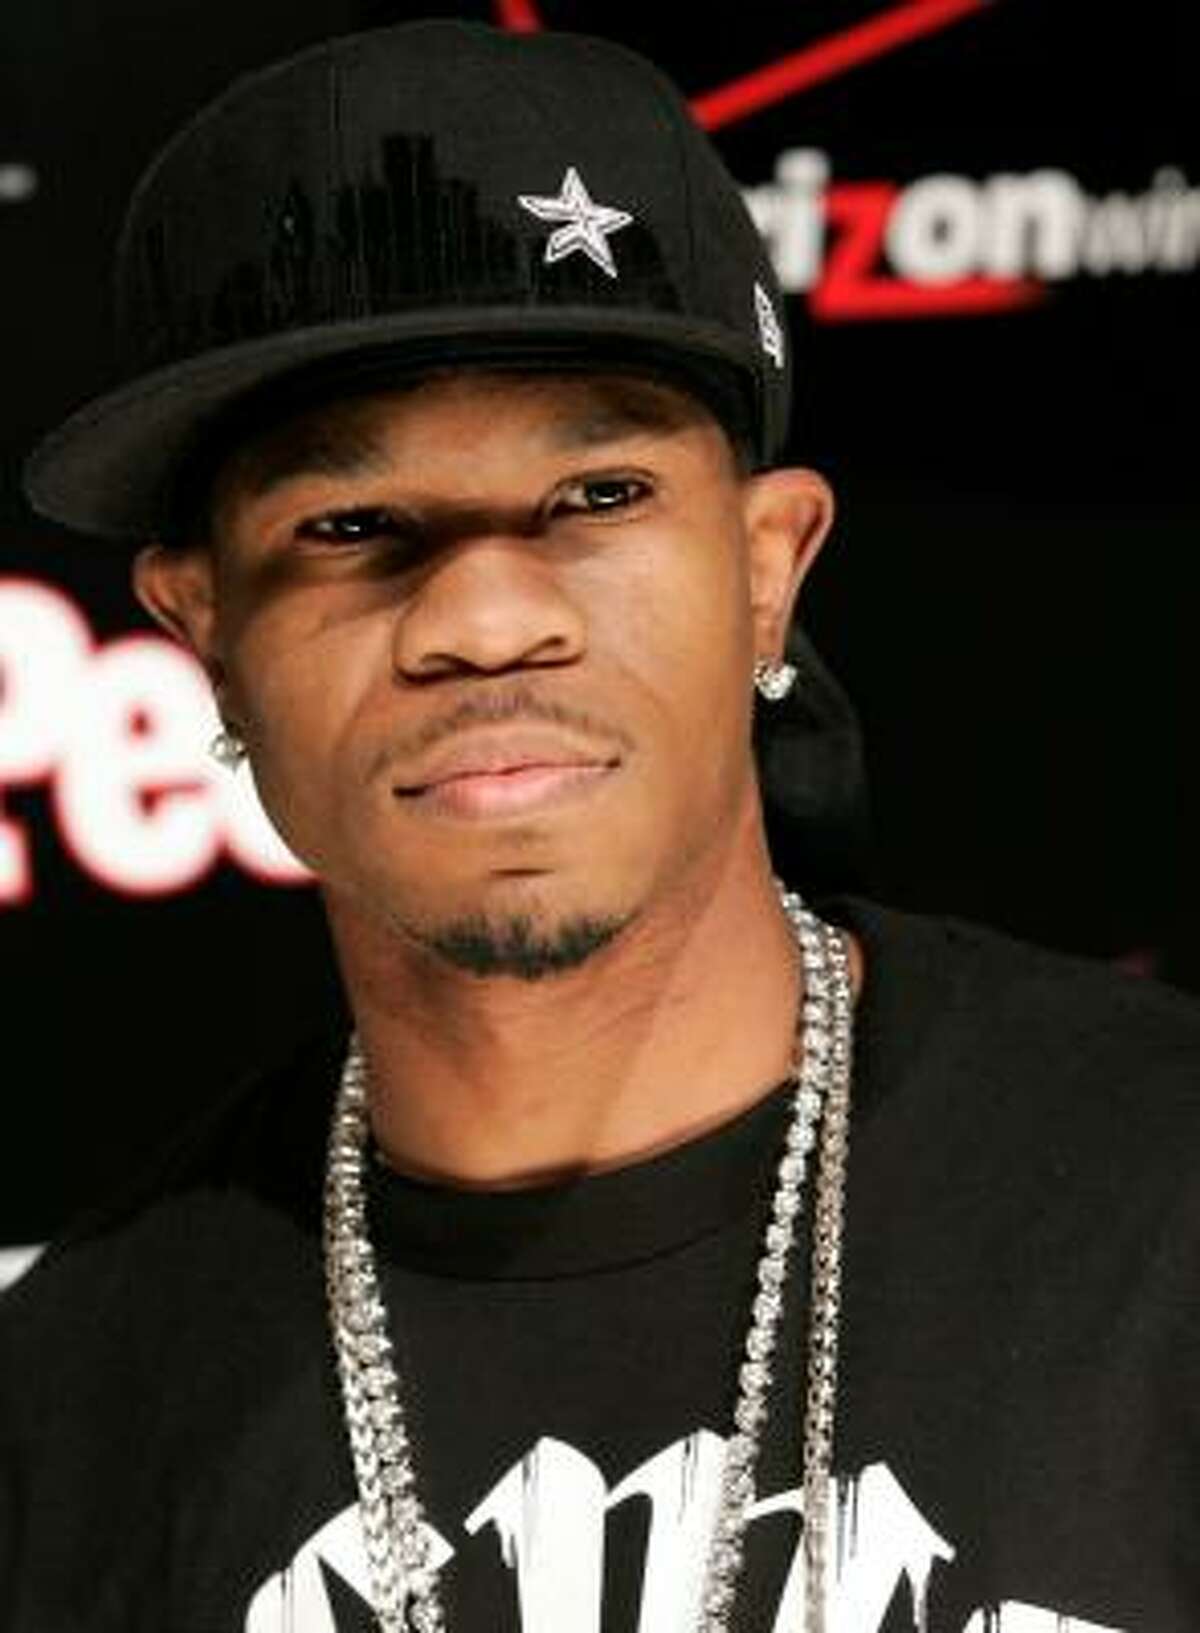 Chamillionaire . The "Ridin' Dirty" singer is named Hakeem Sekiri, hakeem being Arabic for "wise."